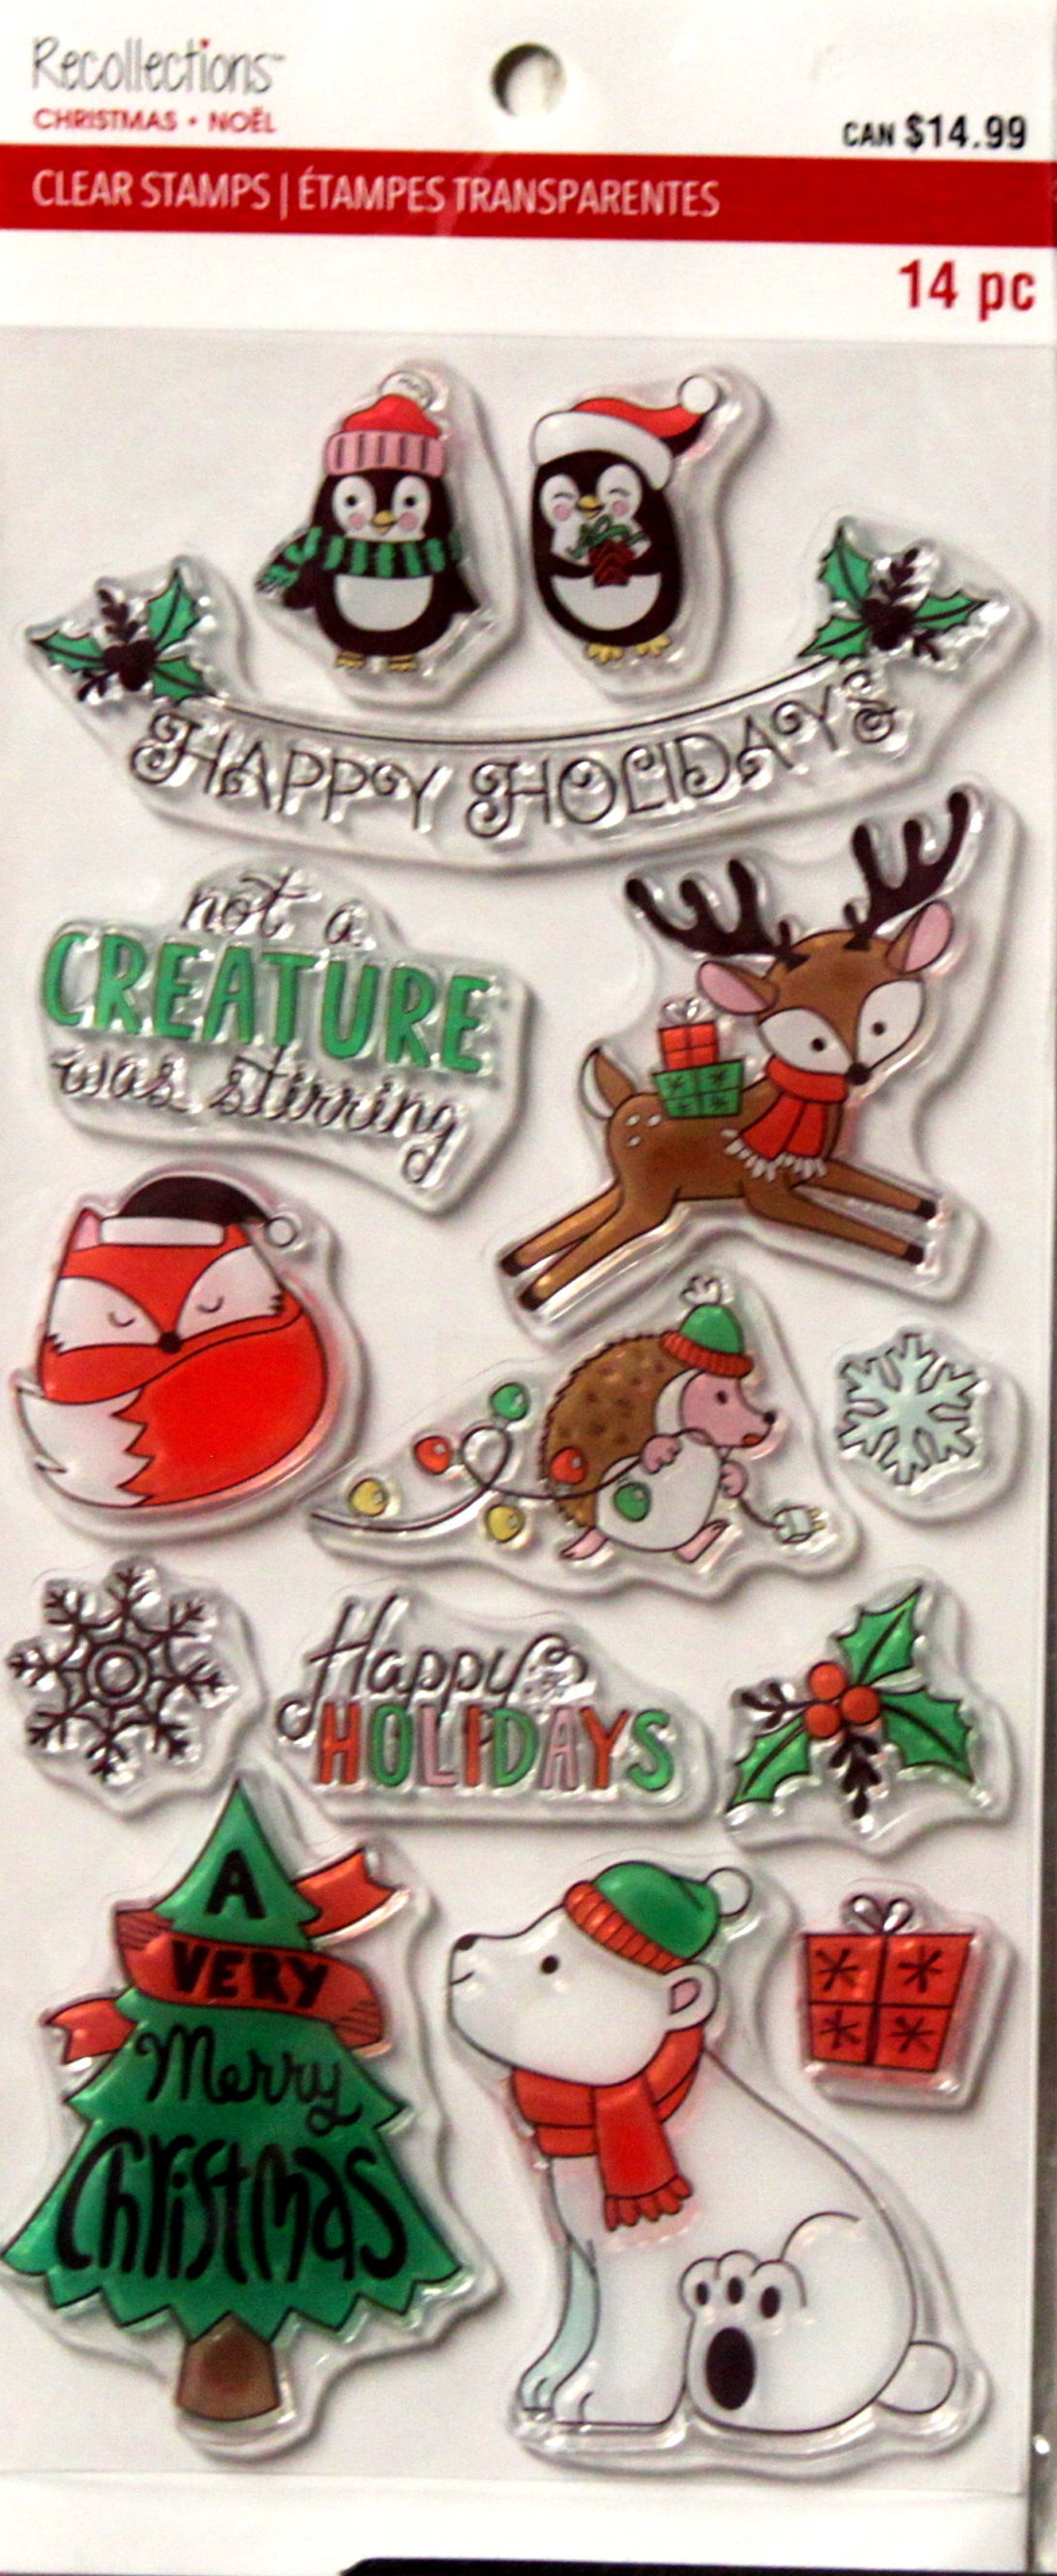 Recollections Christmas Noel Holiday Sentiments & Icons Clear Stamps Collection